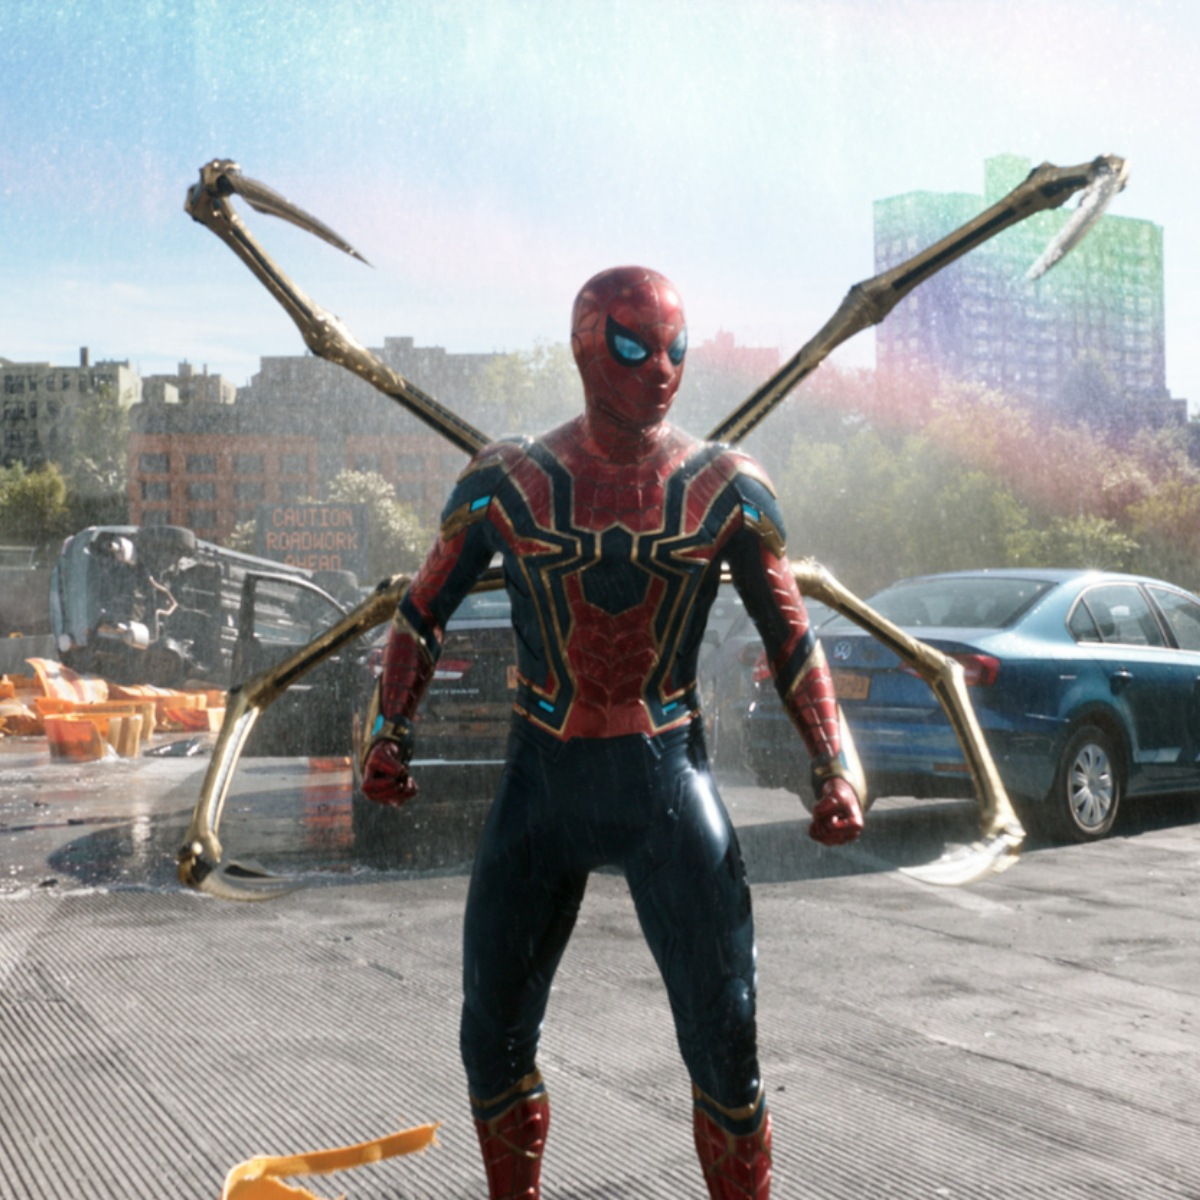 Spider-Man: No Way Home weaves biggest advance booking since Avengers: Endgame at the Indian Box Office